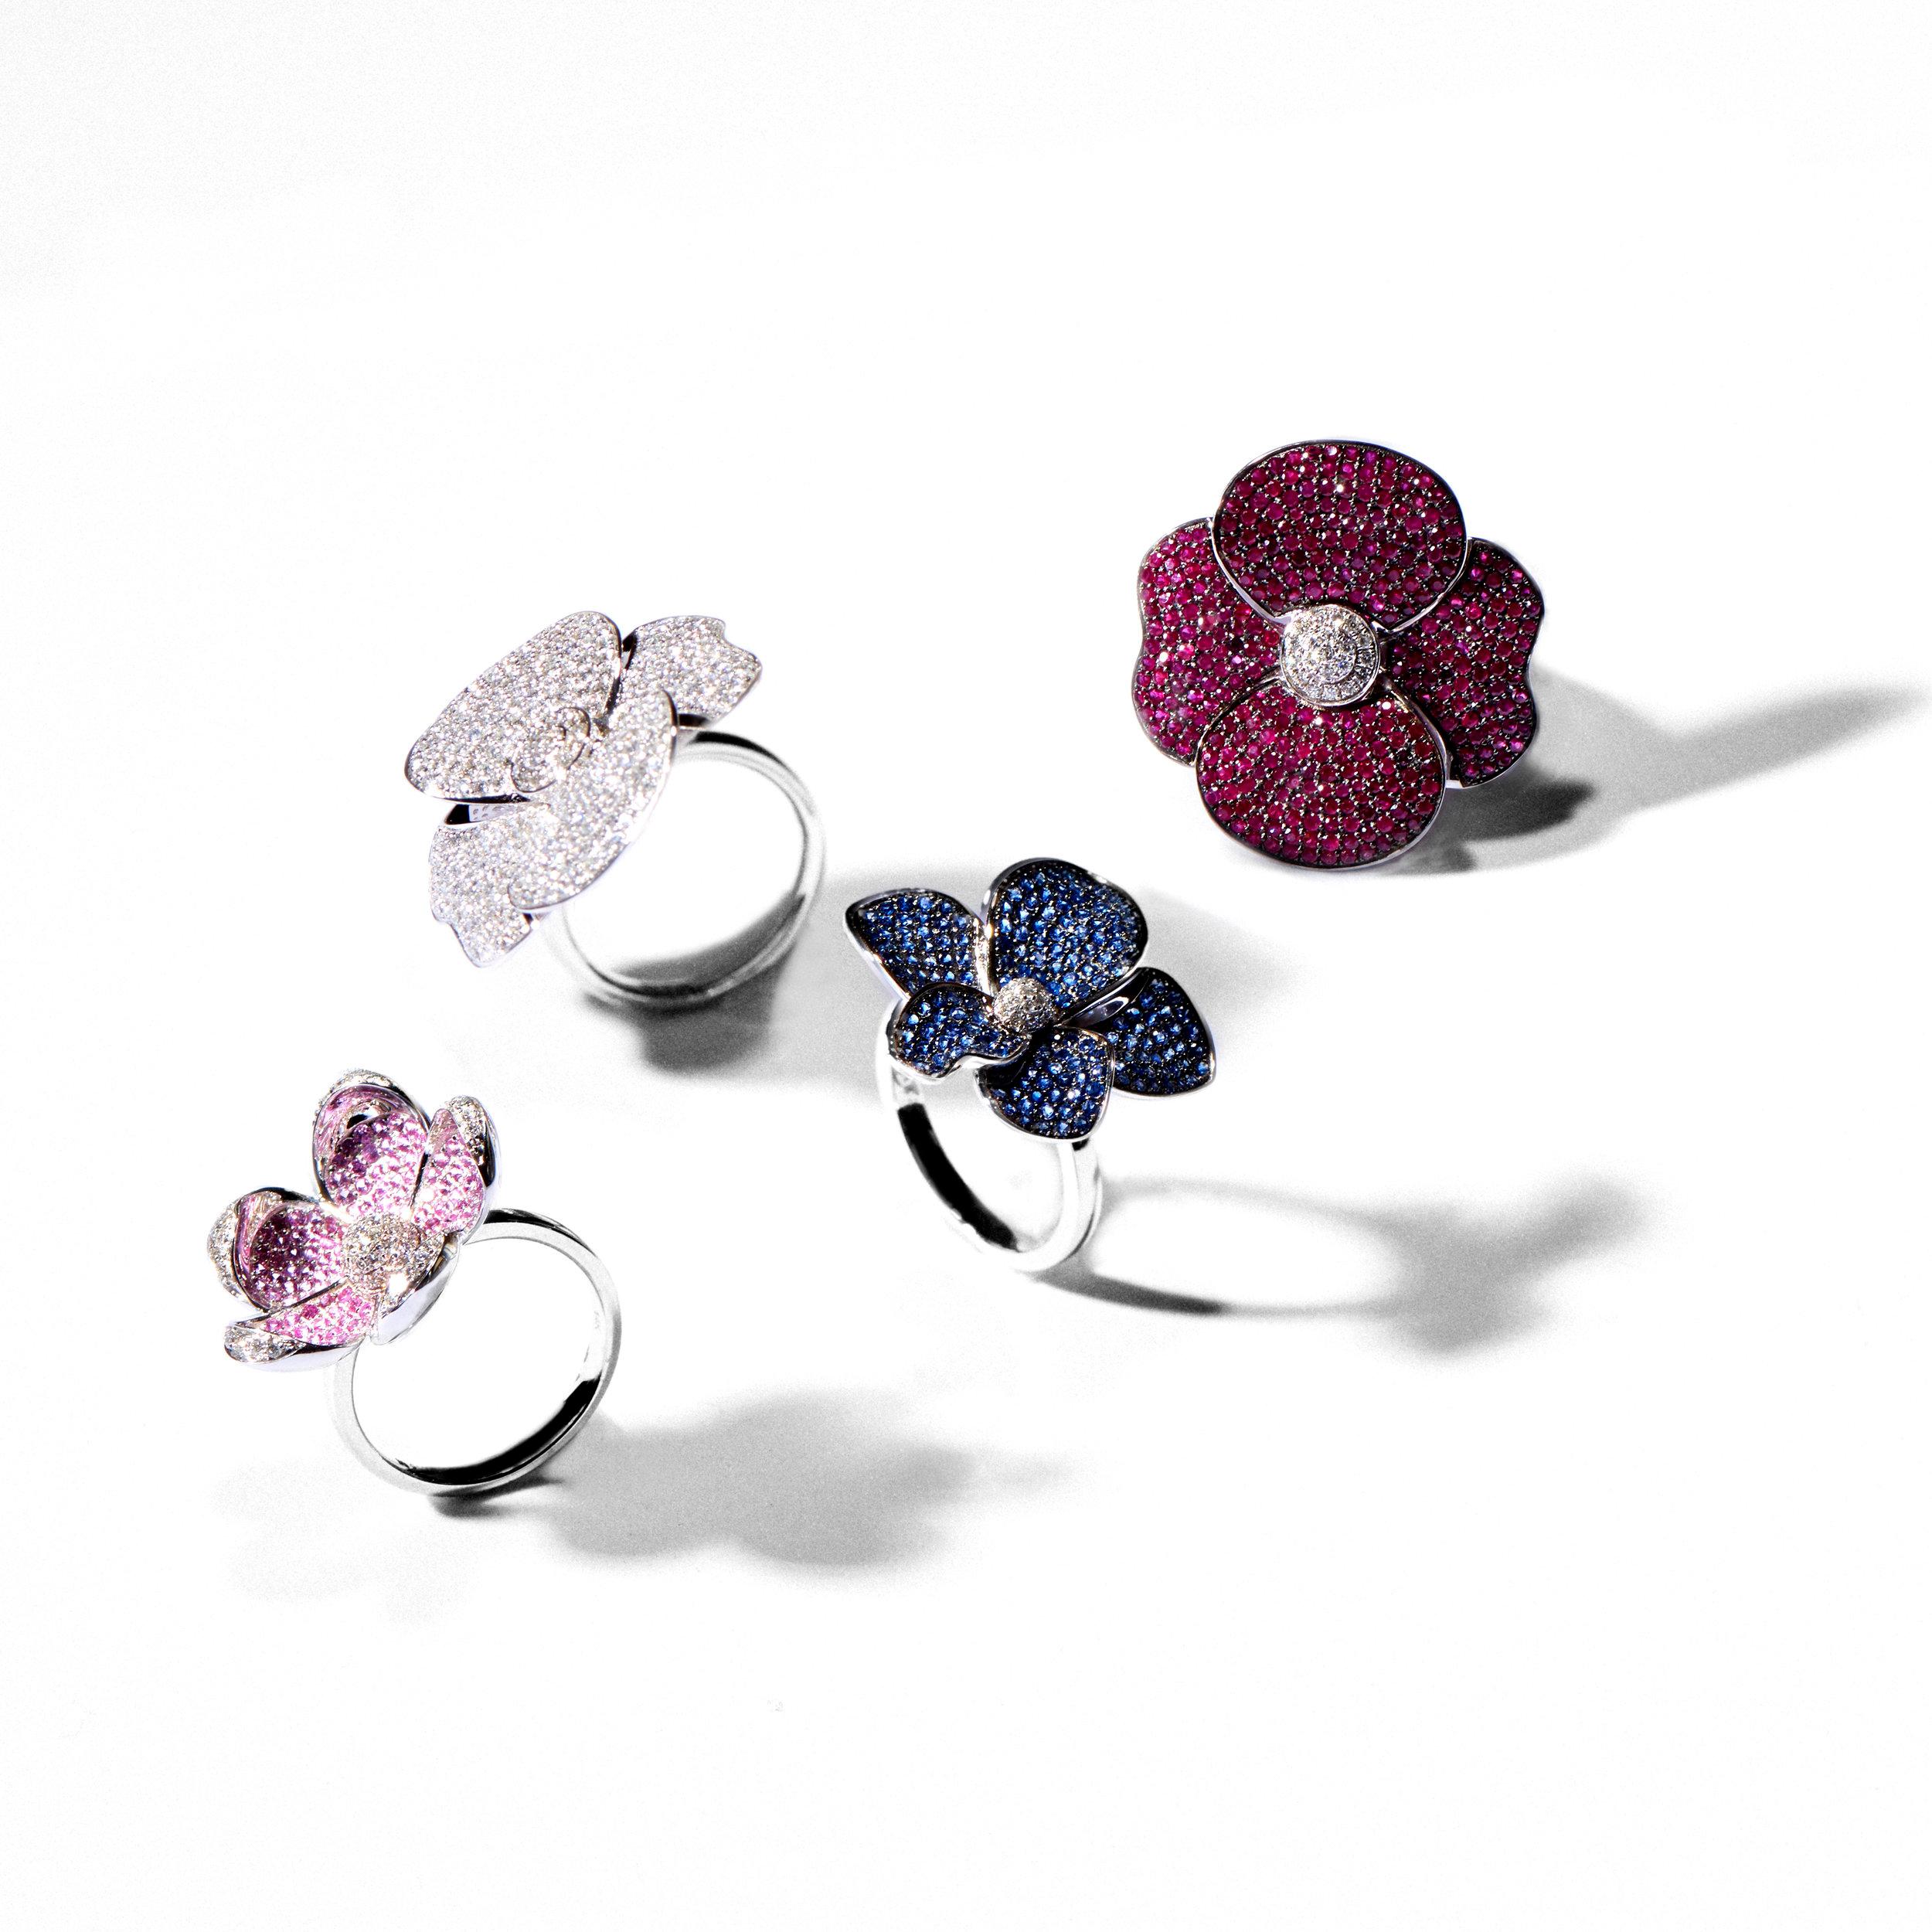 Make a statement with this dramatic cocktail ring. Inspired by floral motifs, the Sakura Pink Sapphire and Diamond Ring features petals encrusted with dazzling pink sapphires surrounding a sphere of brilliant white diamonds set in 14k white gold. US